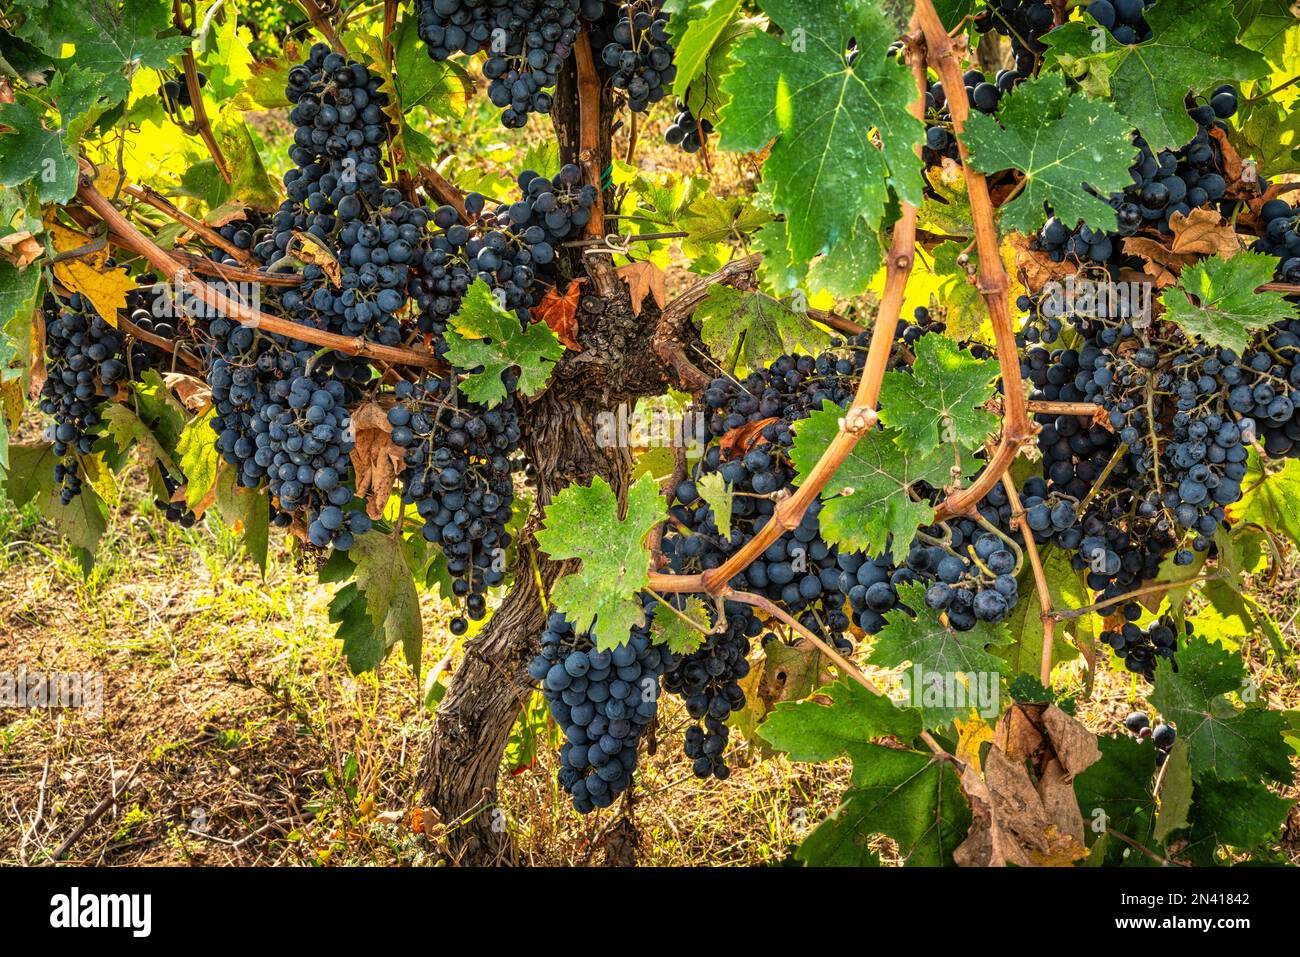 Bunches of Montepulciano d'Abruzzo grapes, ripe and ready for harvest, backlit by the morning sun. Abruzzo, Italy, Europe Stock Photo